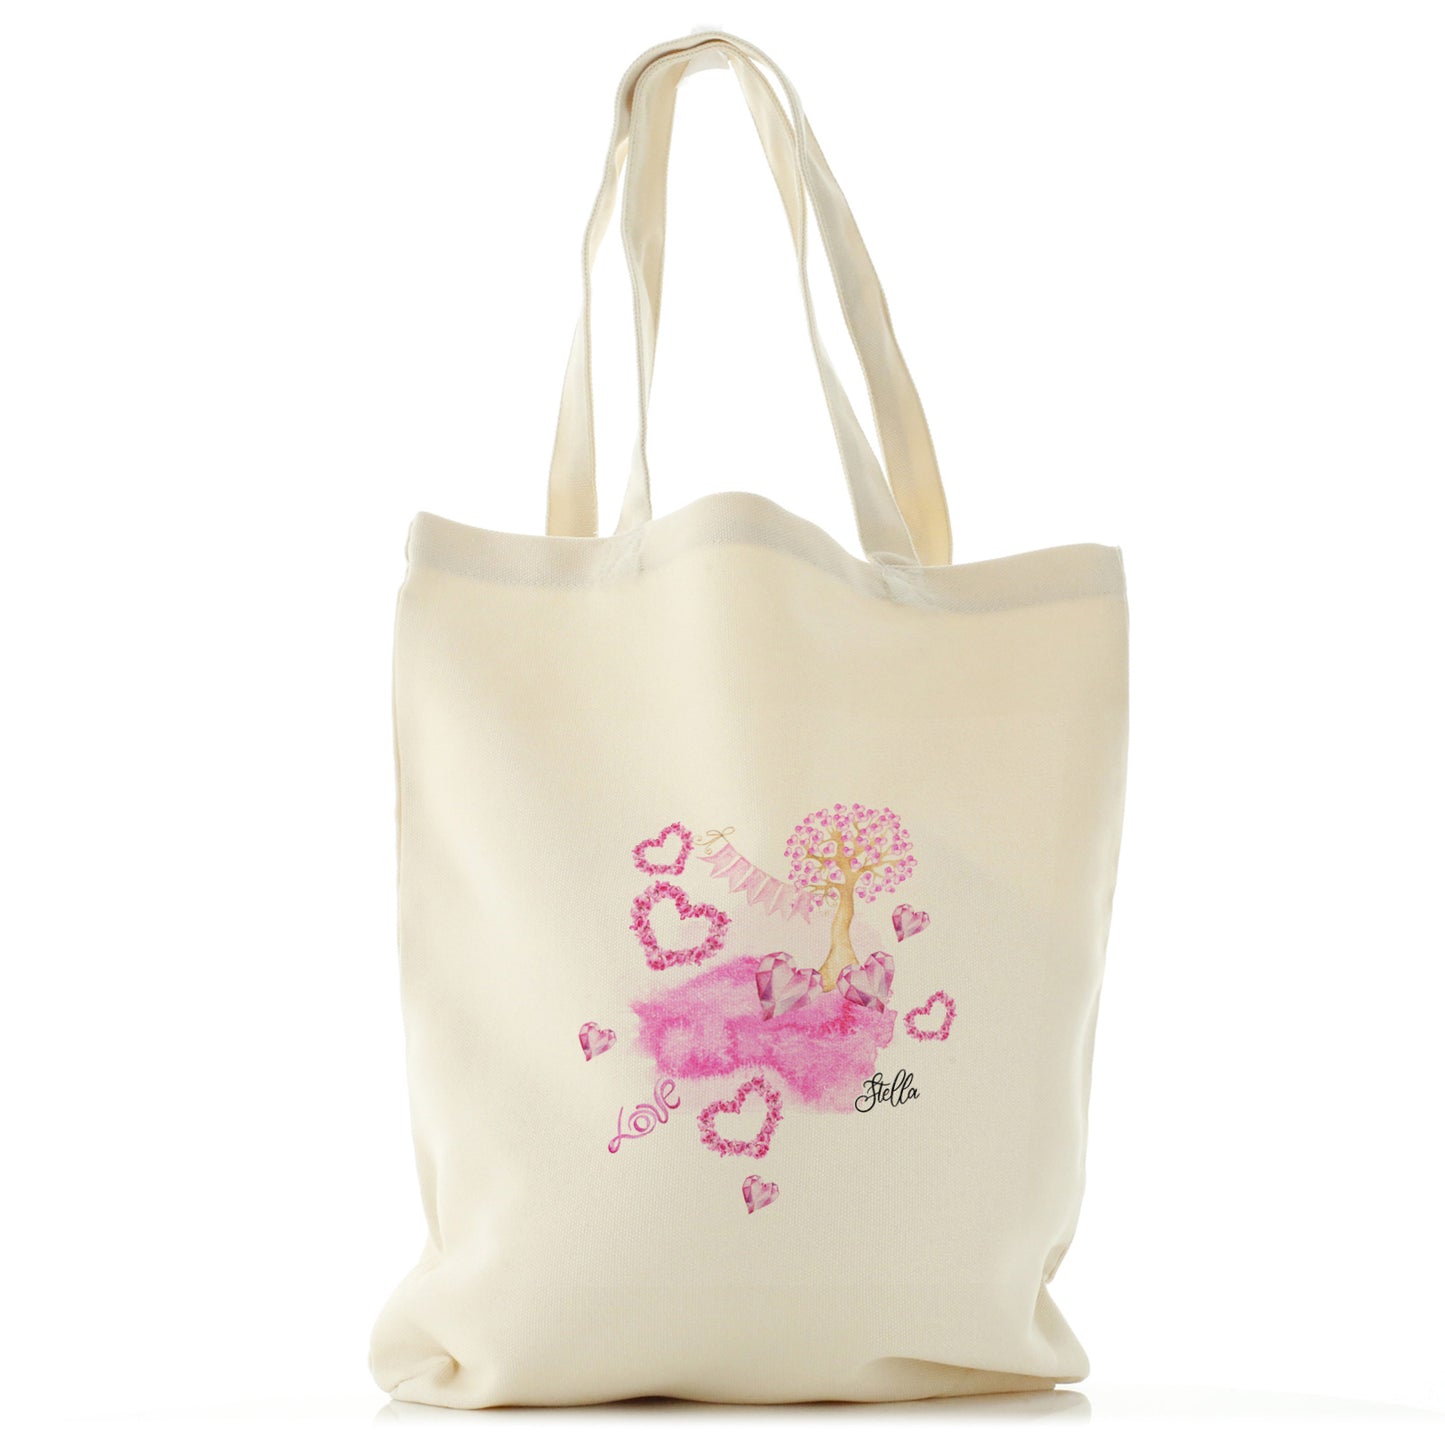 Personalised Canvas Tote Bag with Stylish Text and Pink Love Landscape Print